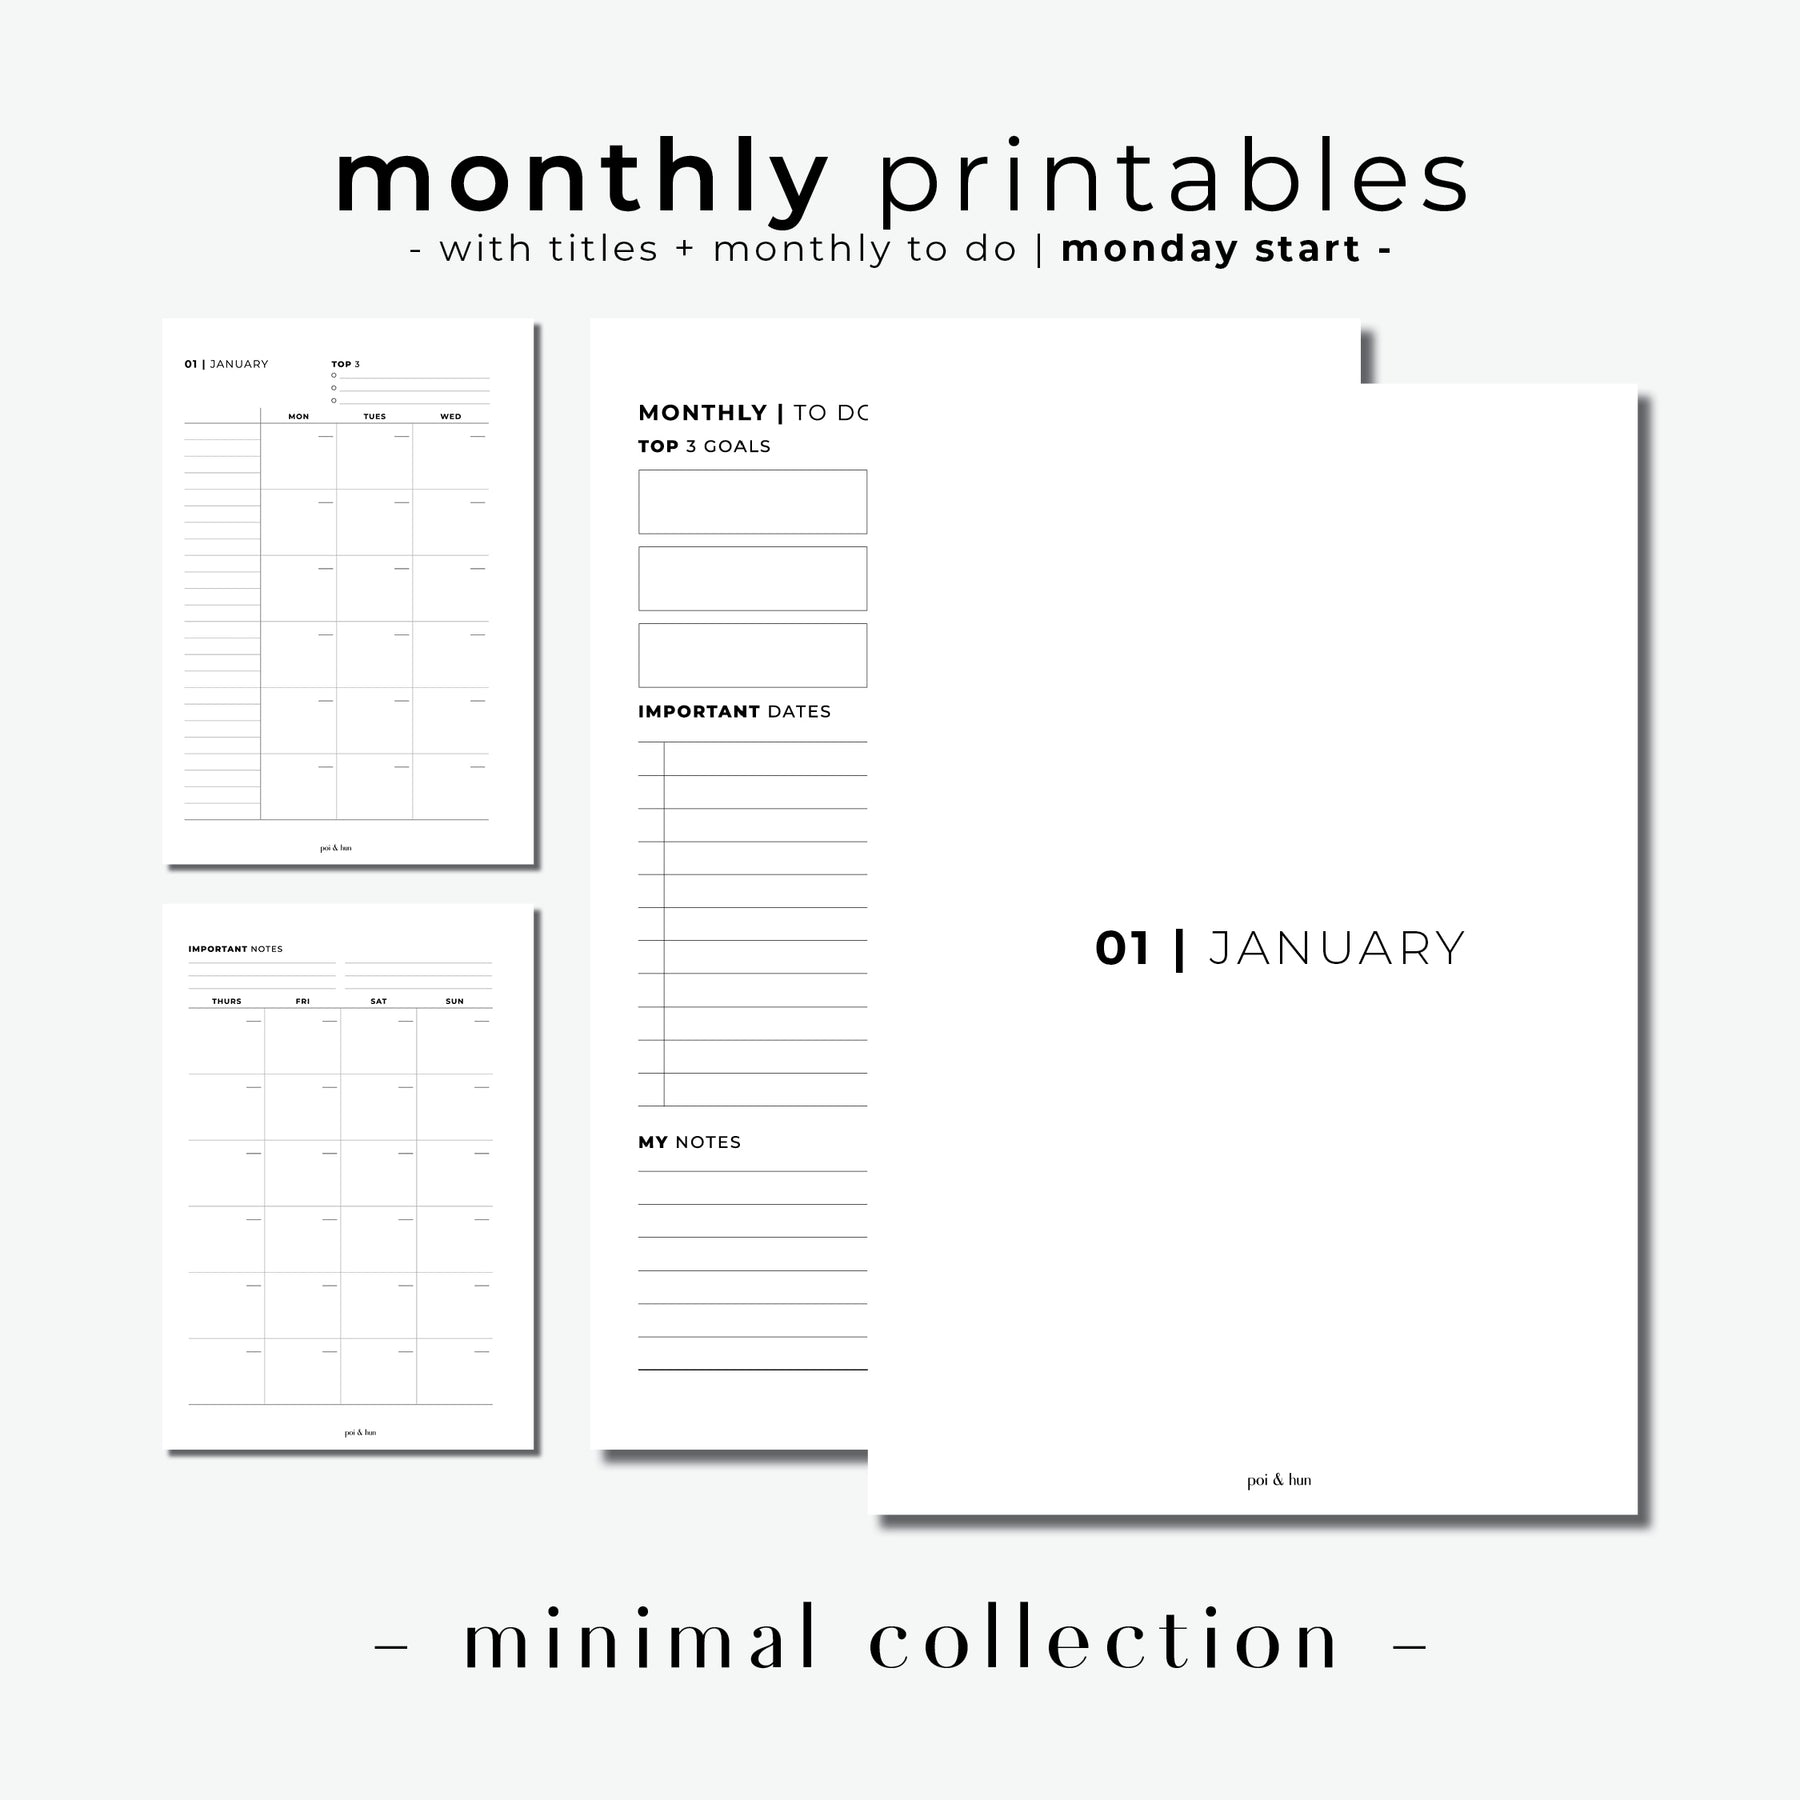 2024 MO1P Month On One Page Dated Planner Insert Refill